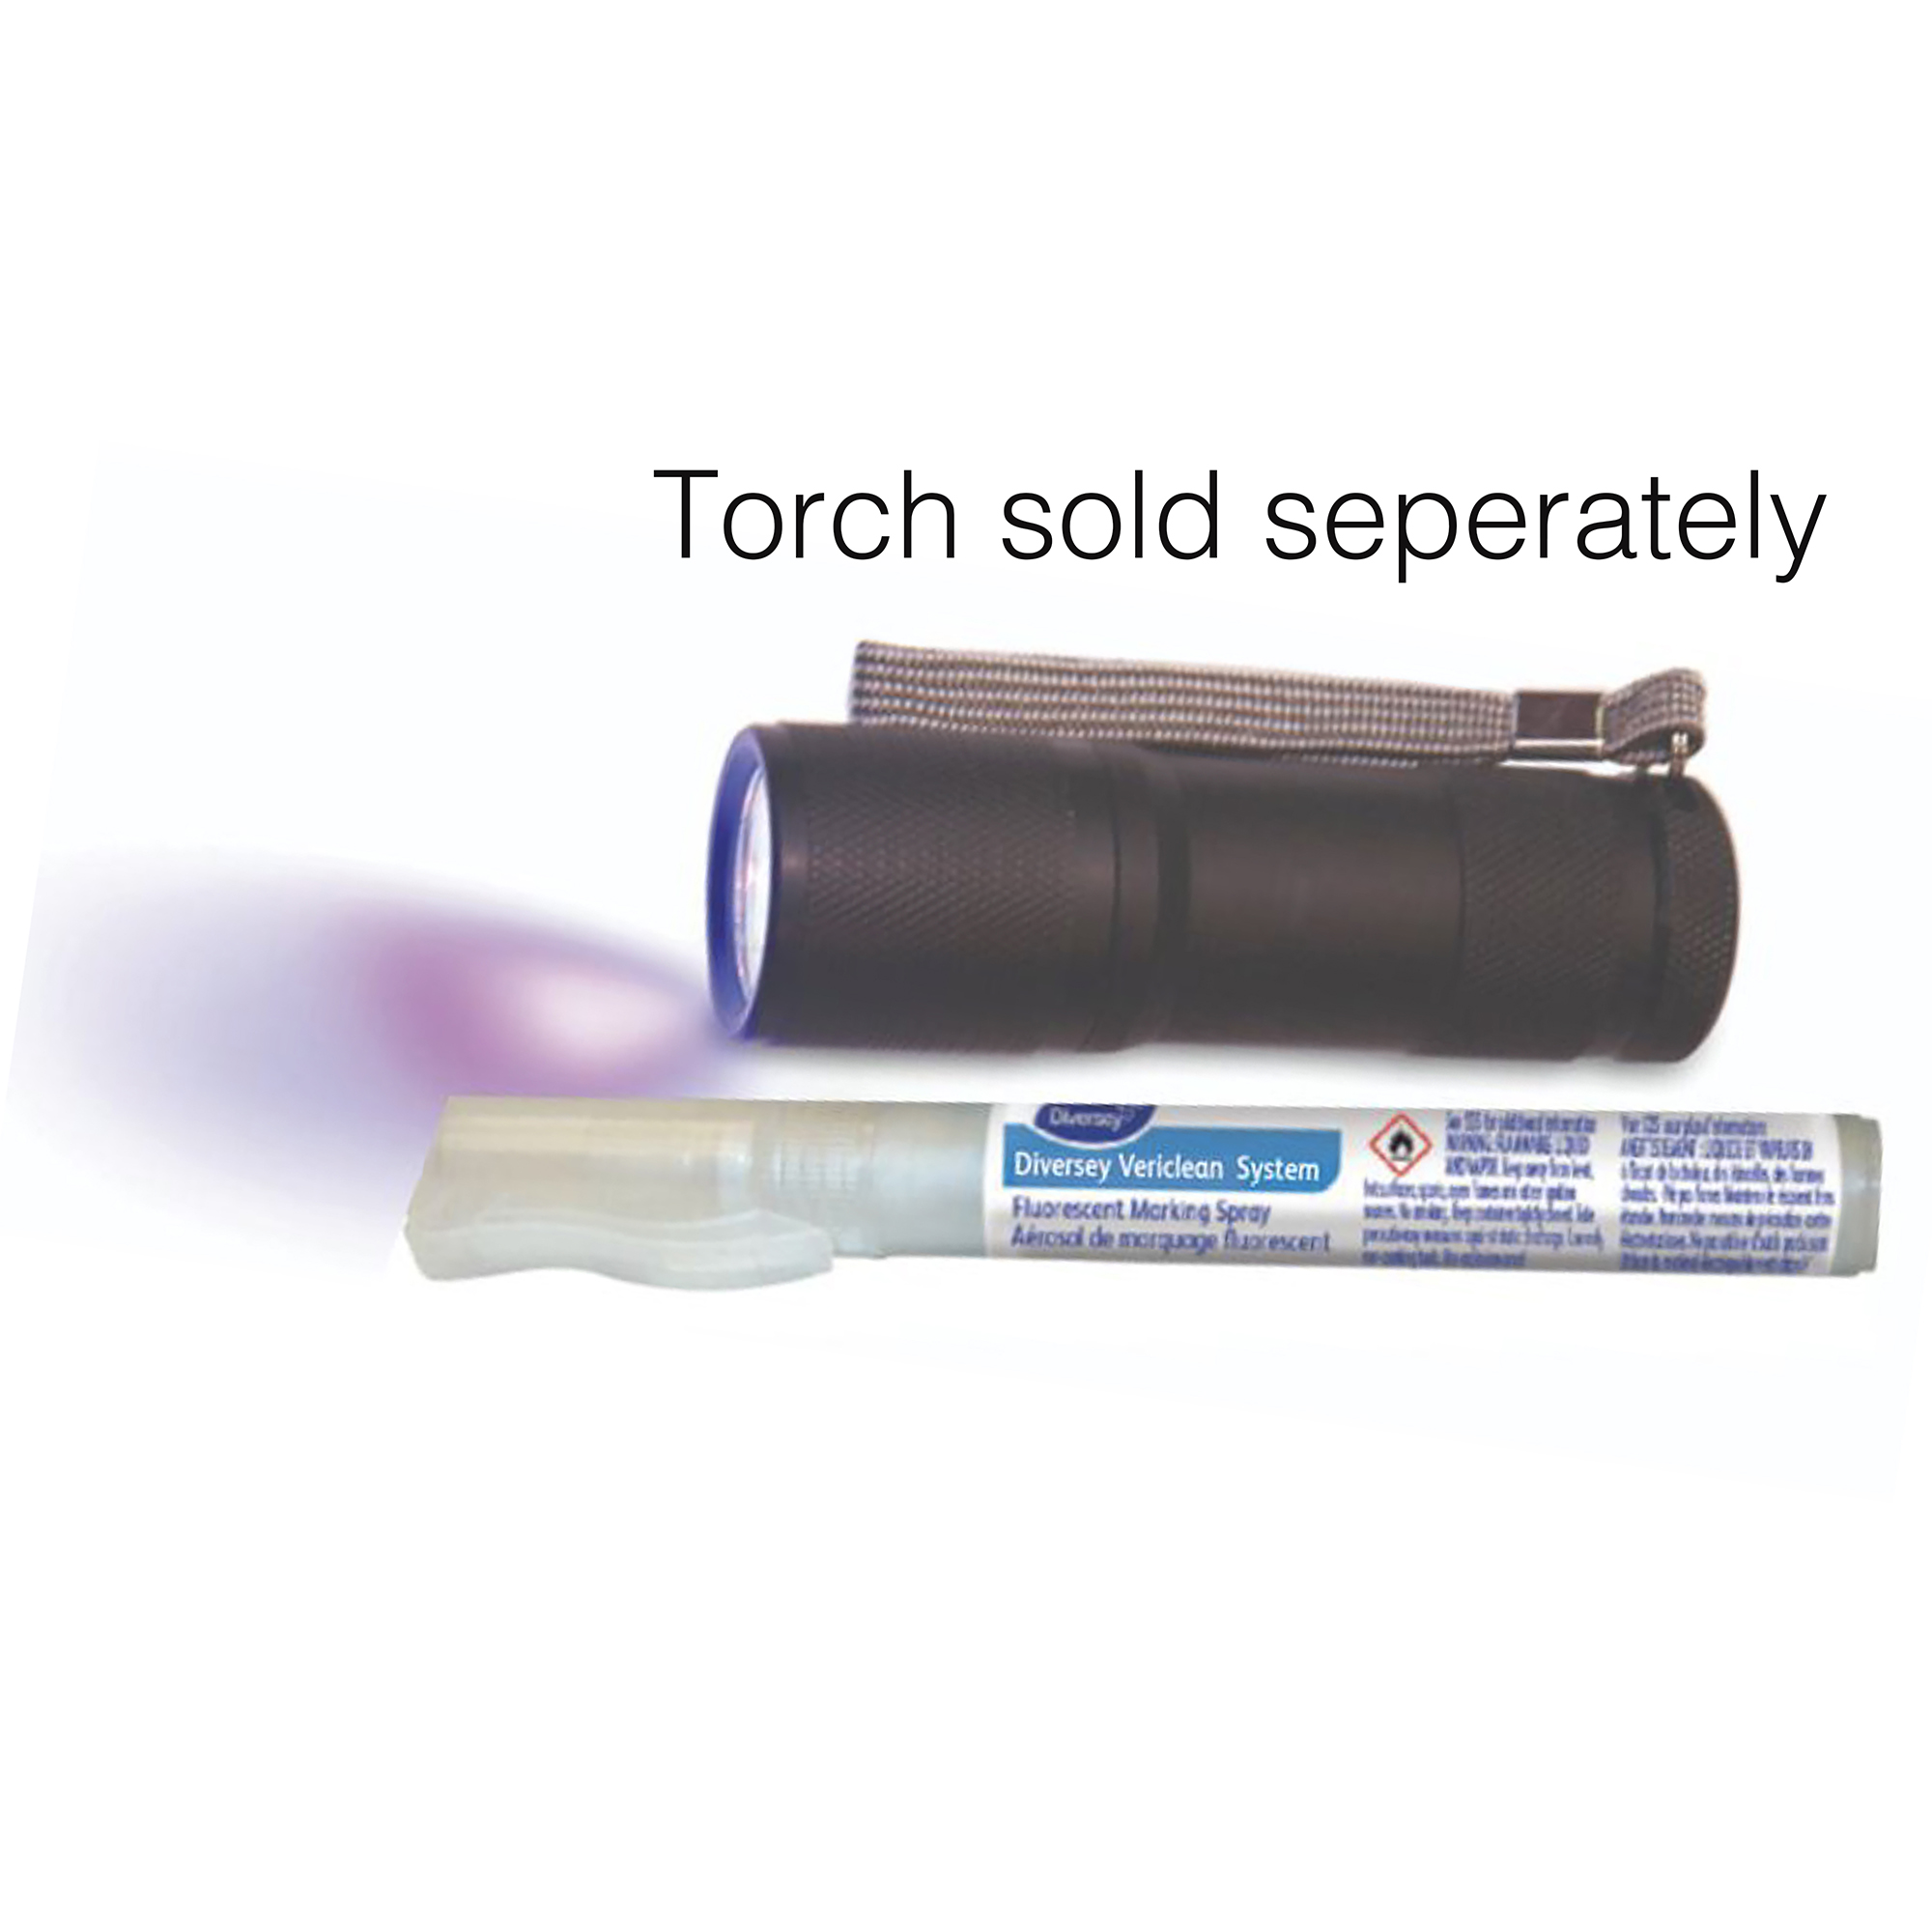 Diversey Vericlean pen and torch